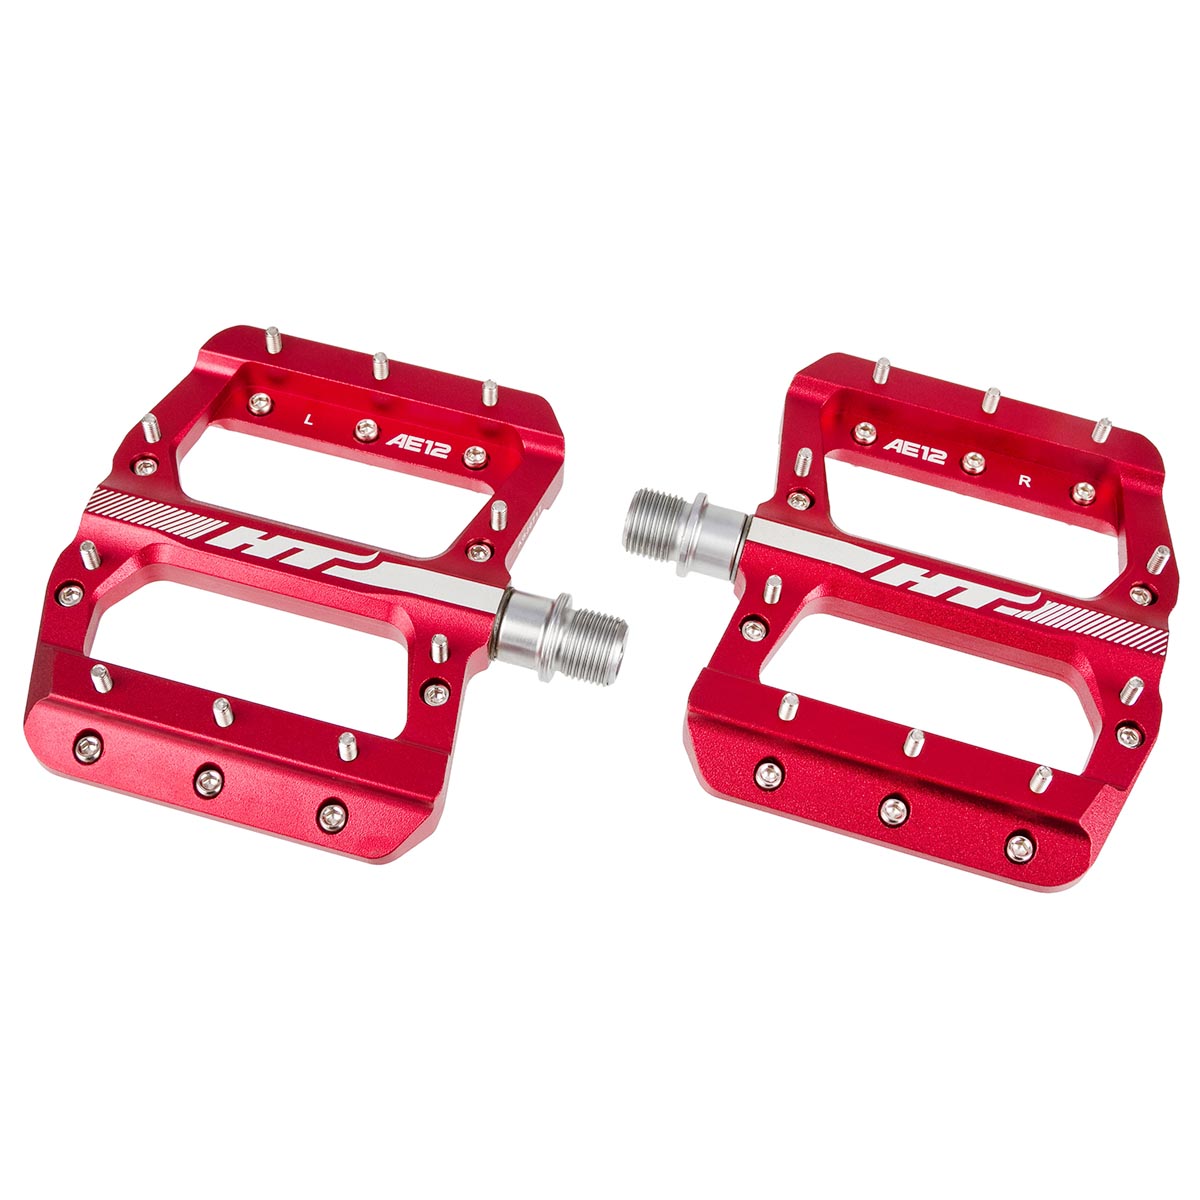 HT Components Pédale AE12 Red